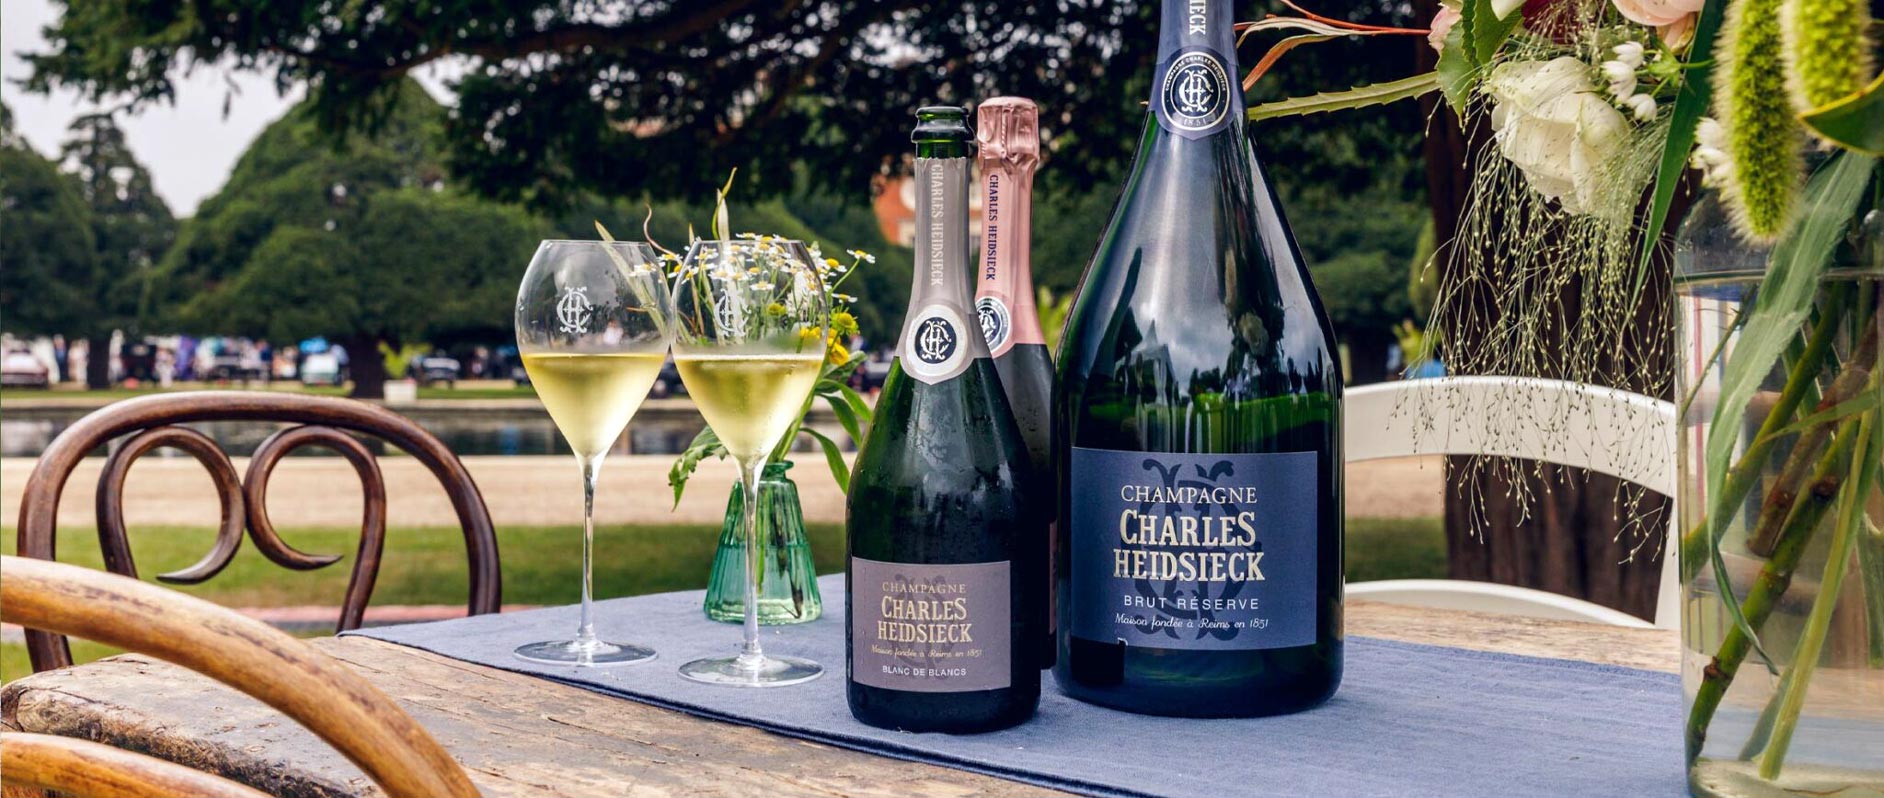 Charles Heidsieck at Concours of Elegance